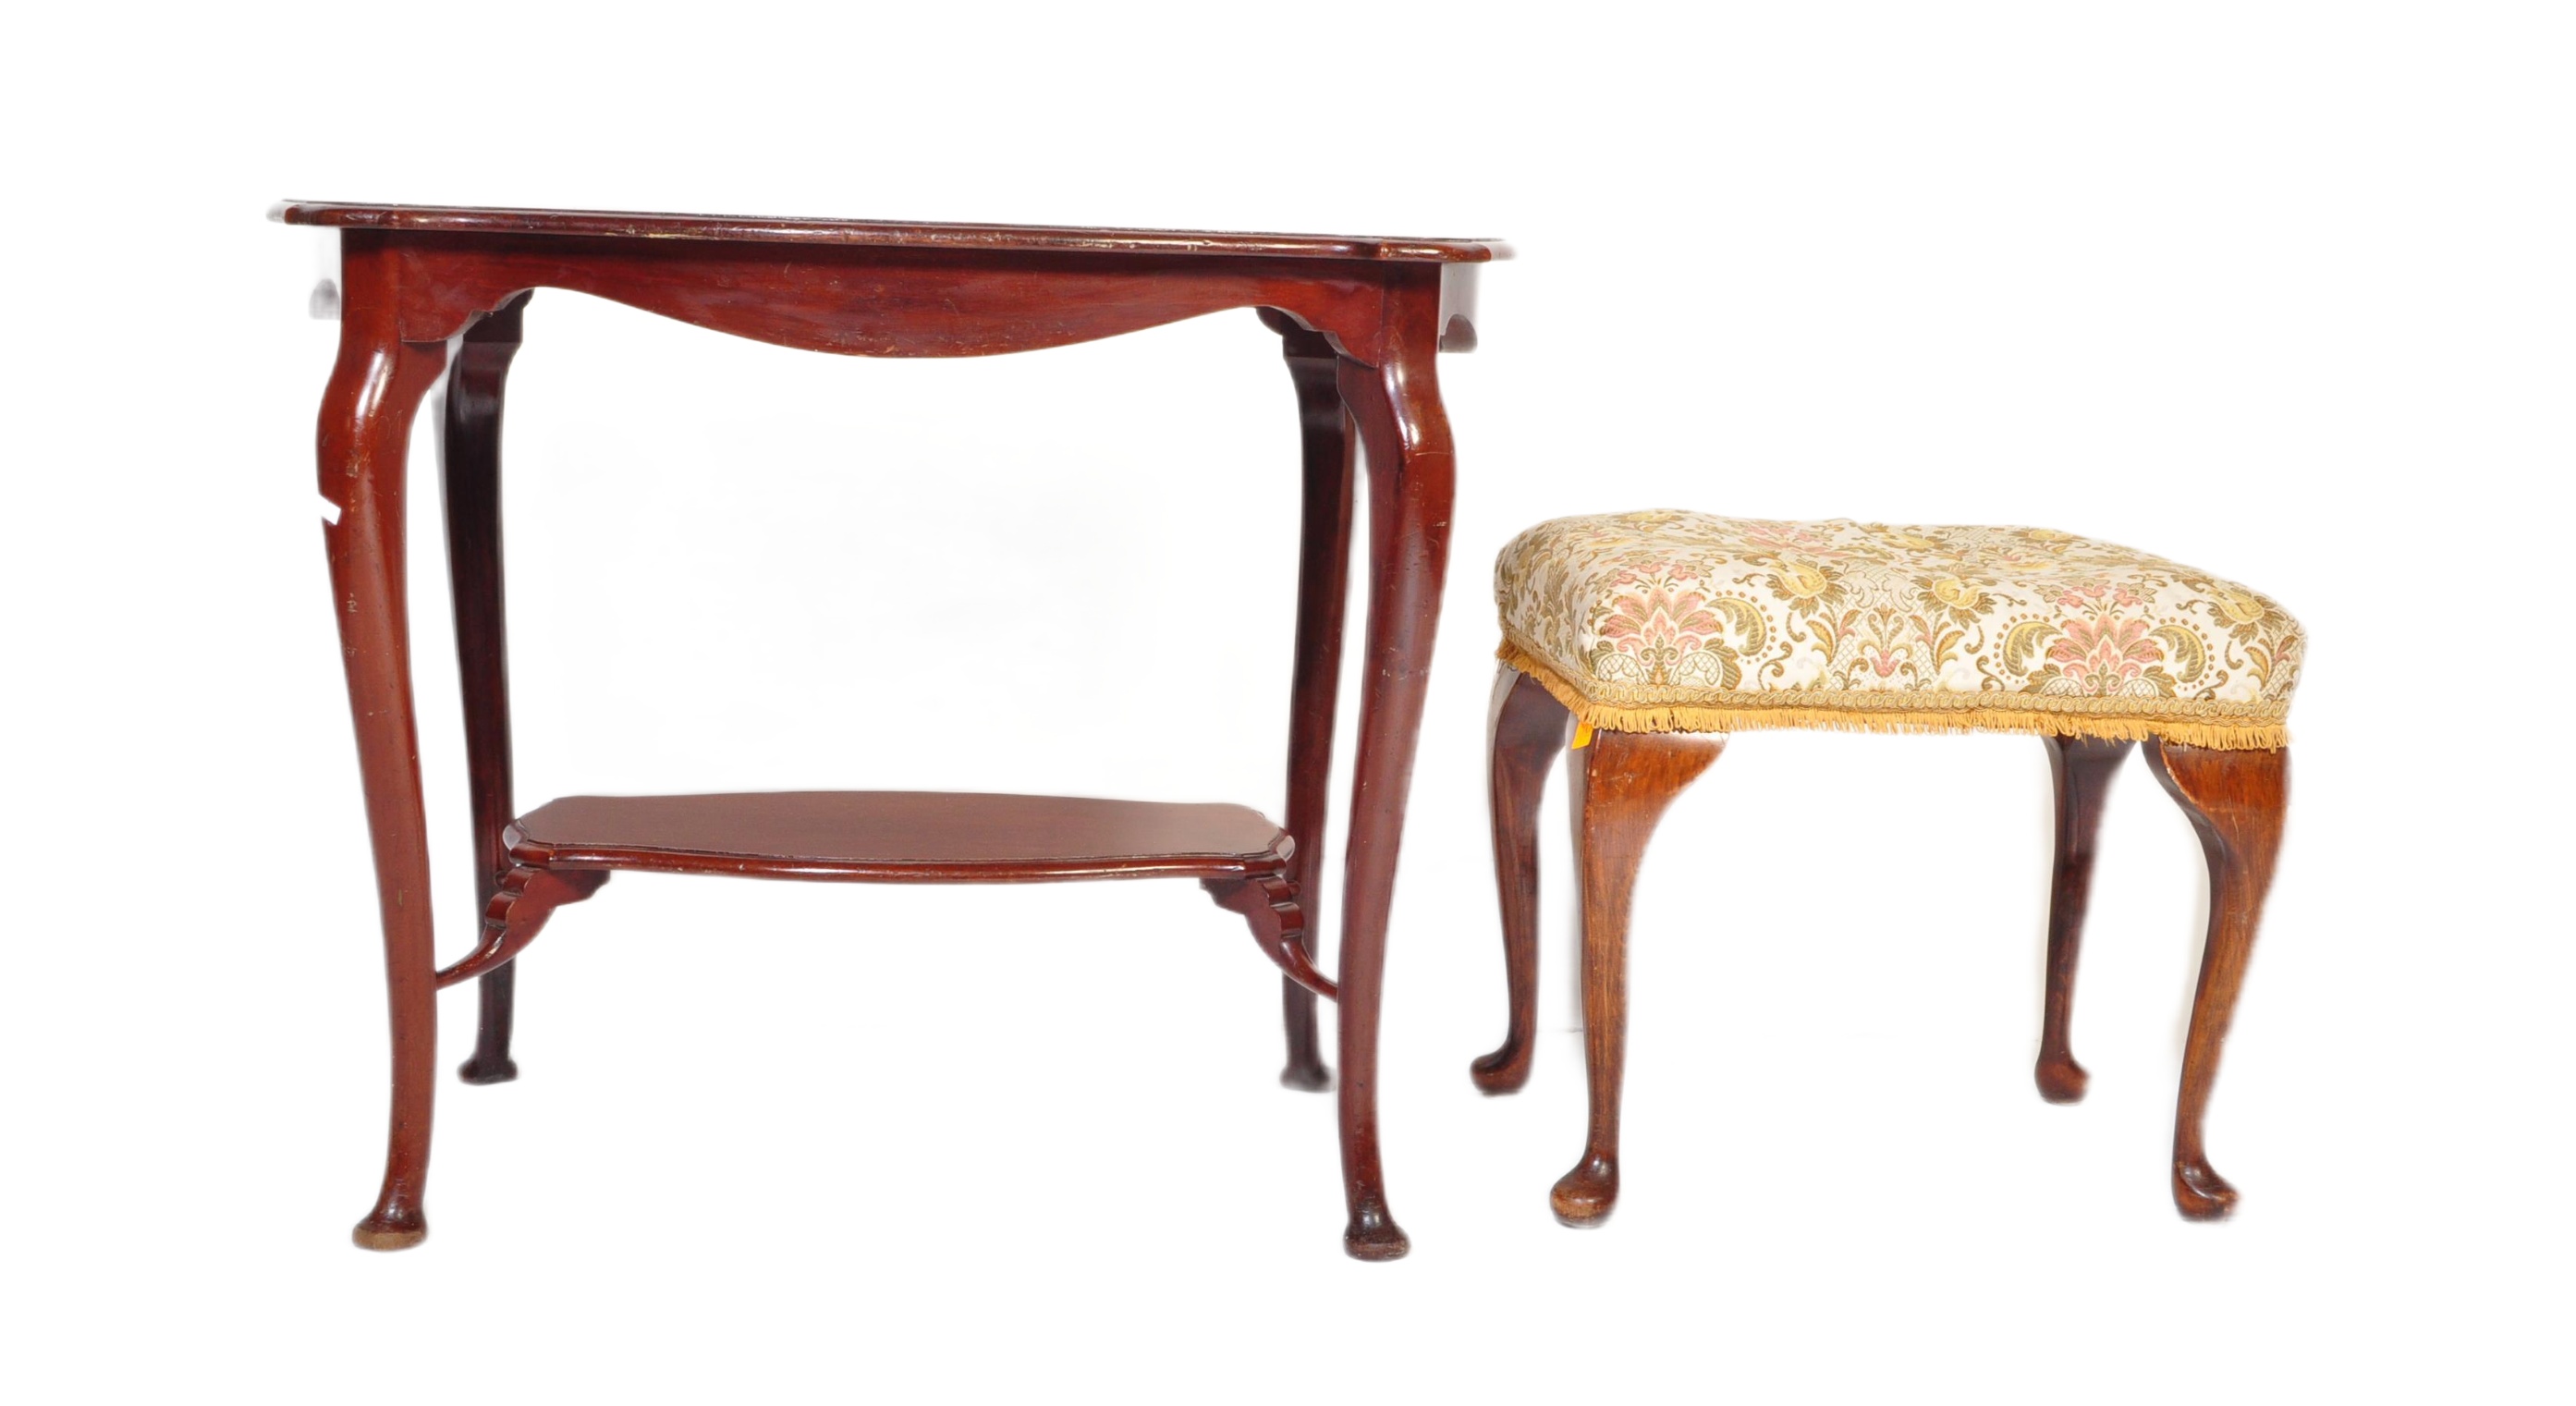 EDWARDIAN INLAID SIDE TABLE & QUEEN ANNE STYLE FOOTSTOOL